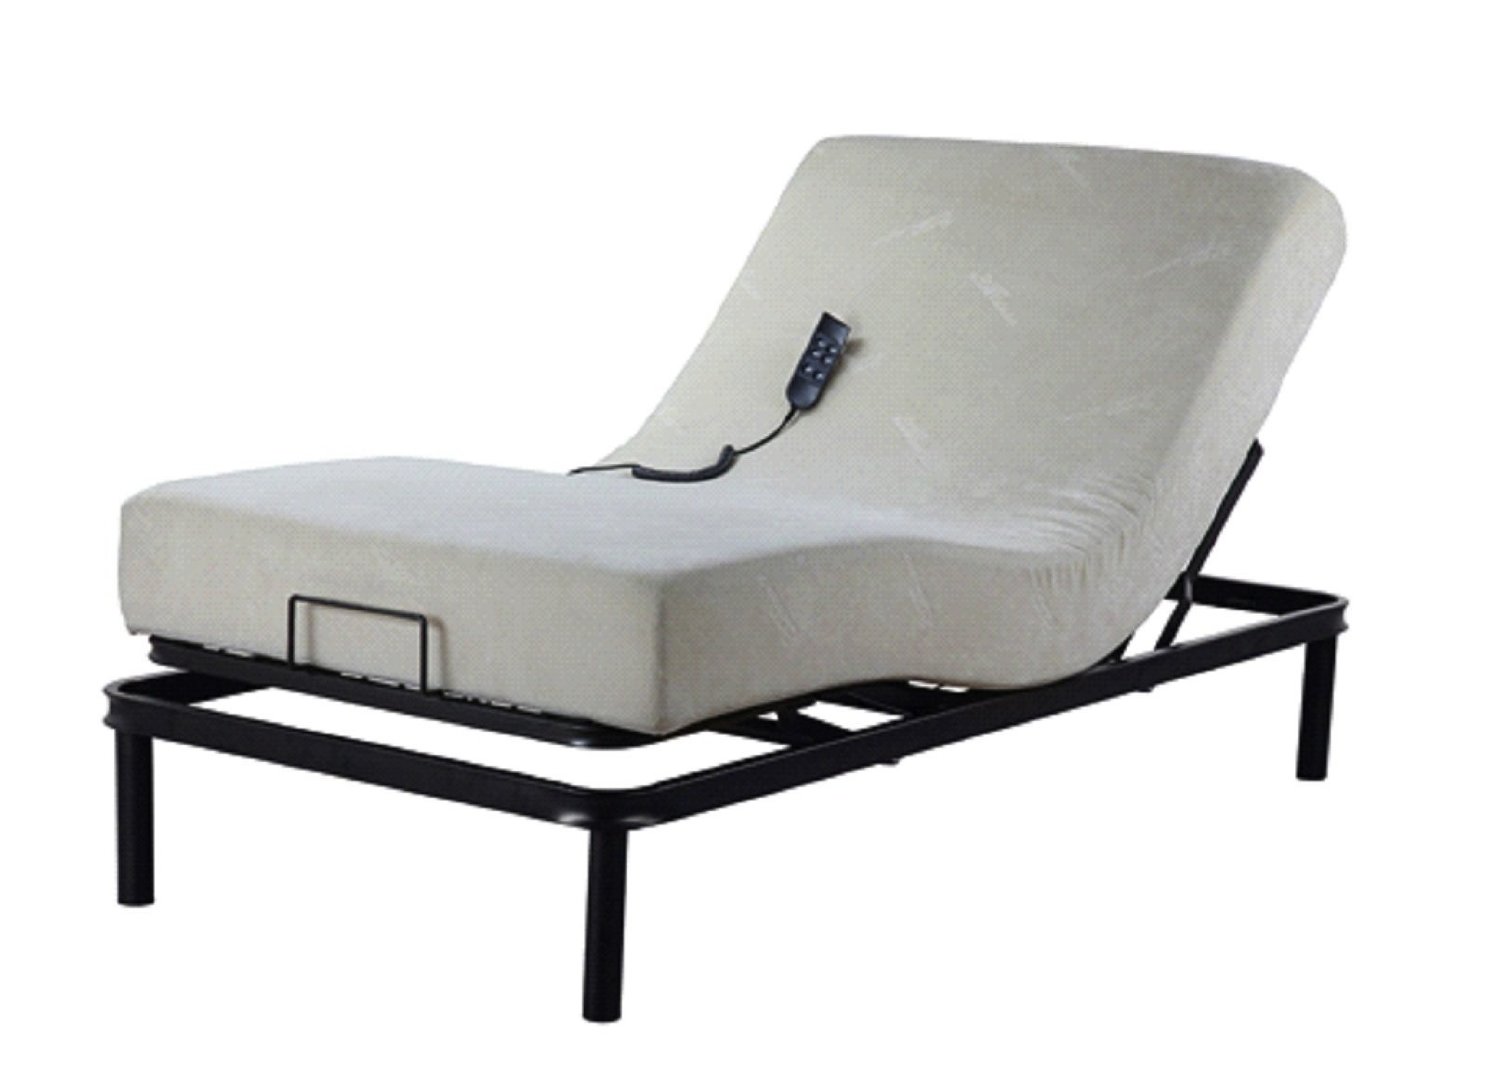 discount inexpensive Phoenix adjustable bed cheap power base fundation motorized frame discount sale price cost